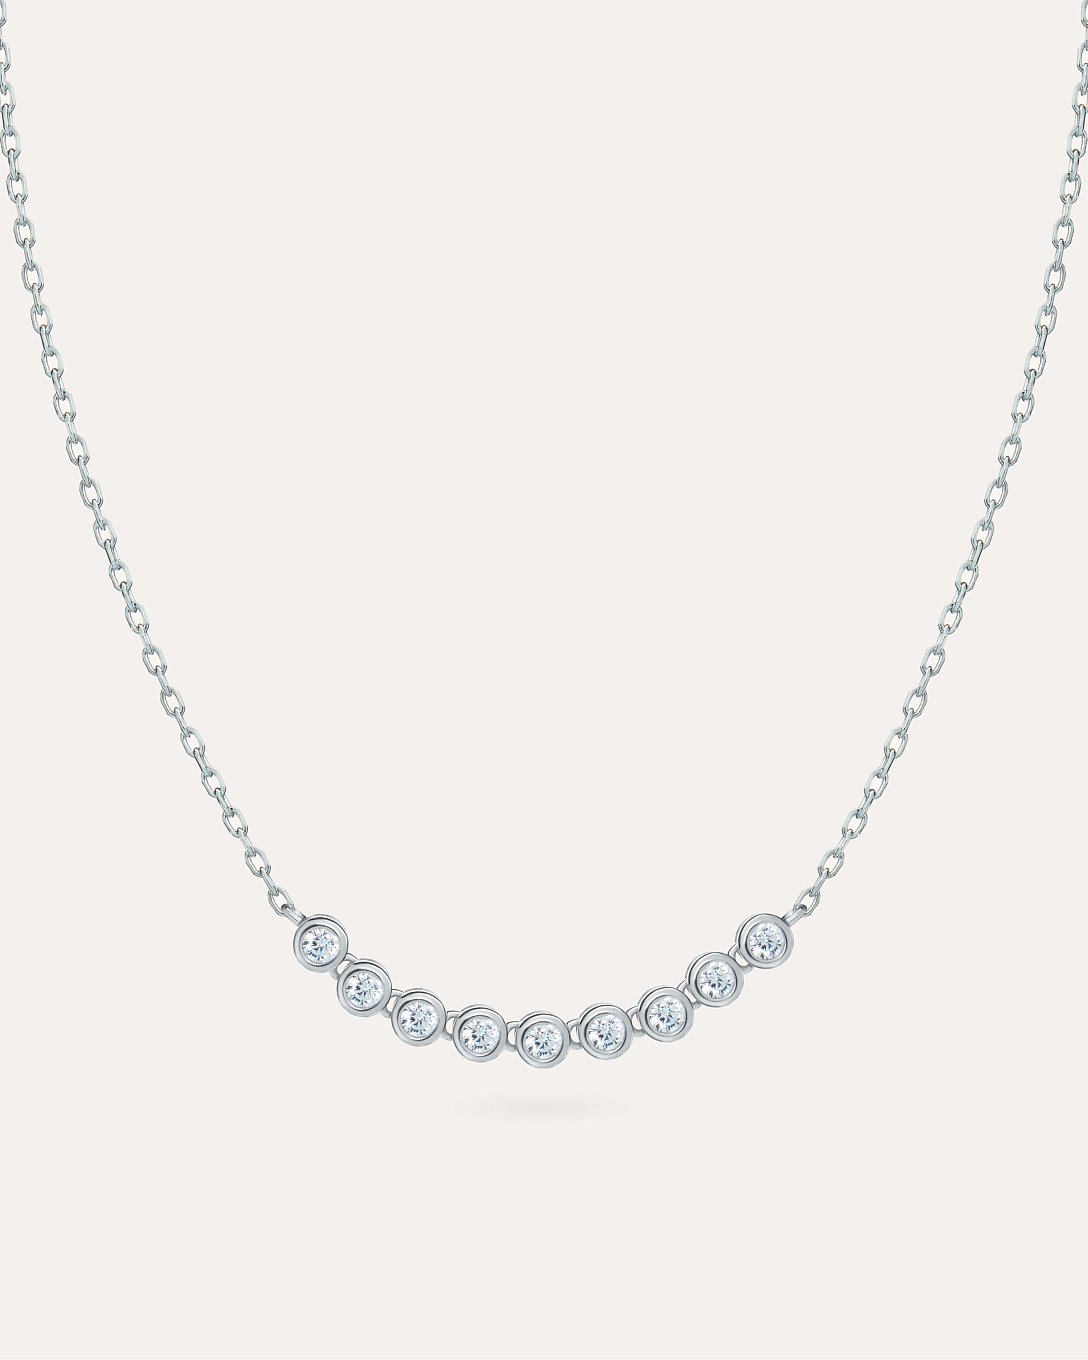 Silver necklace with Cubic Zirconia